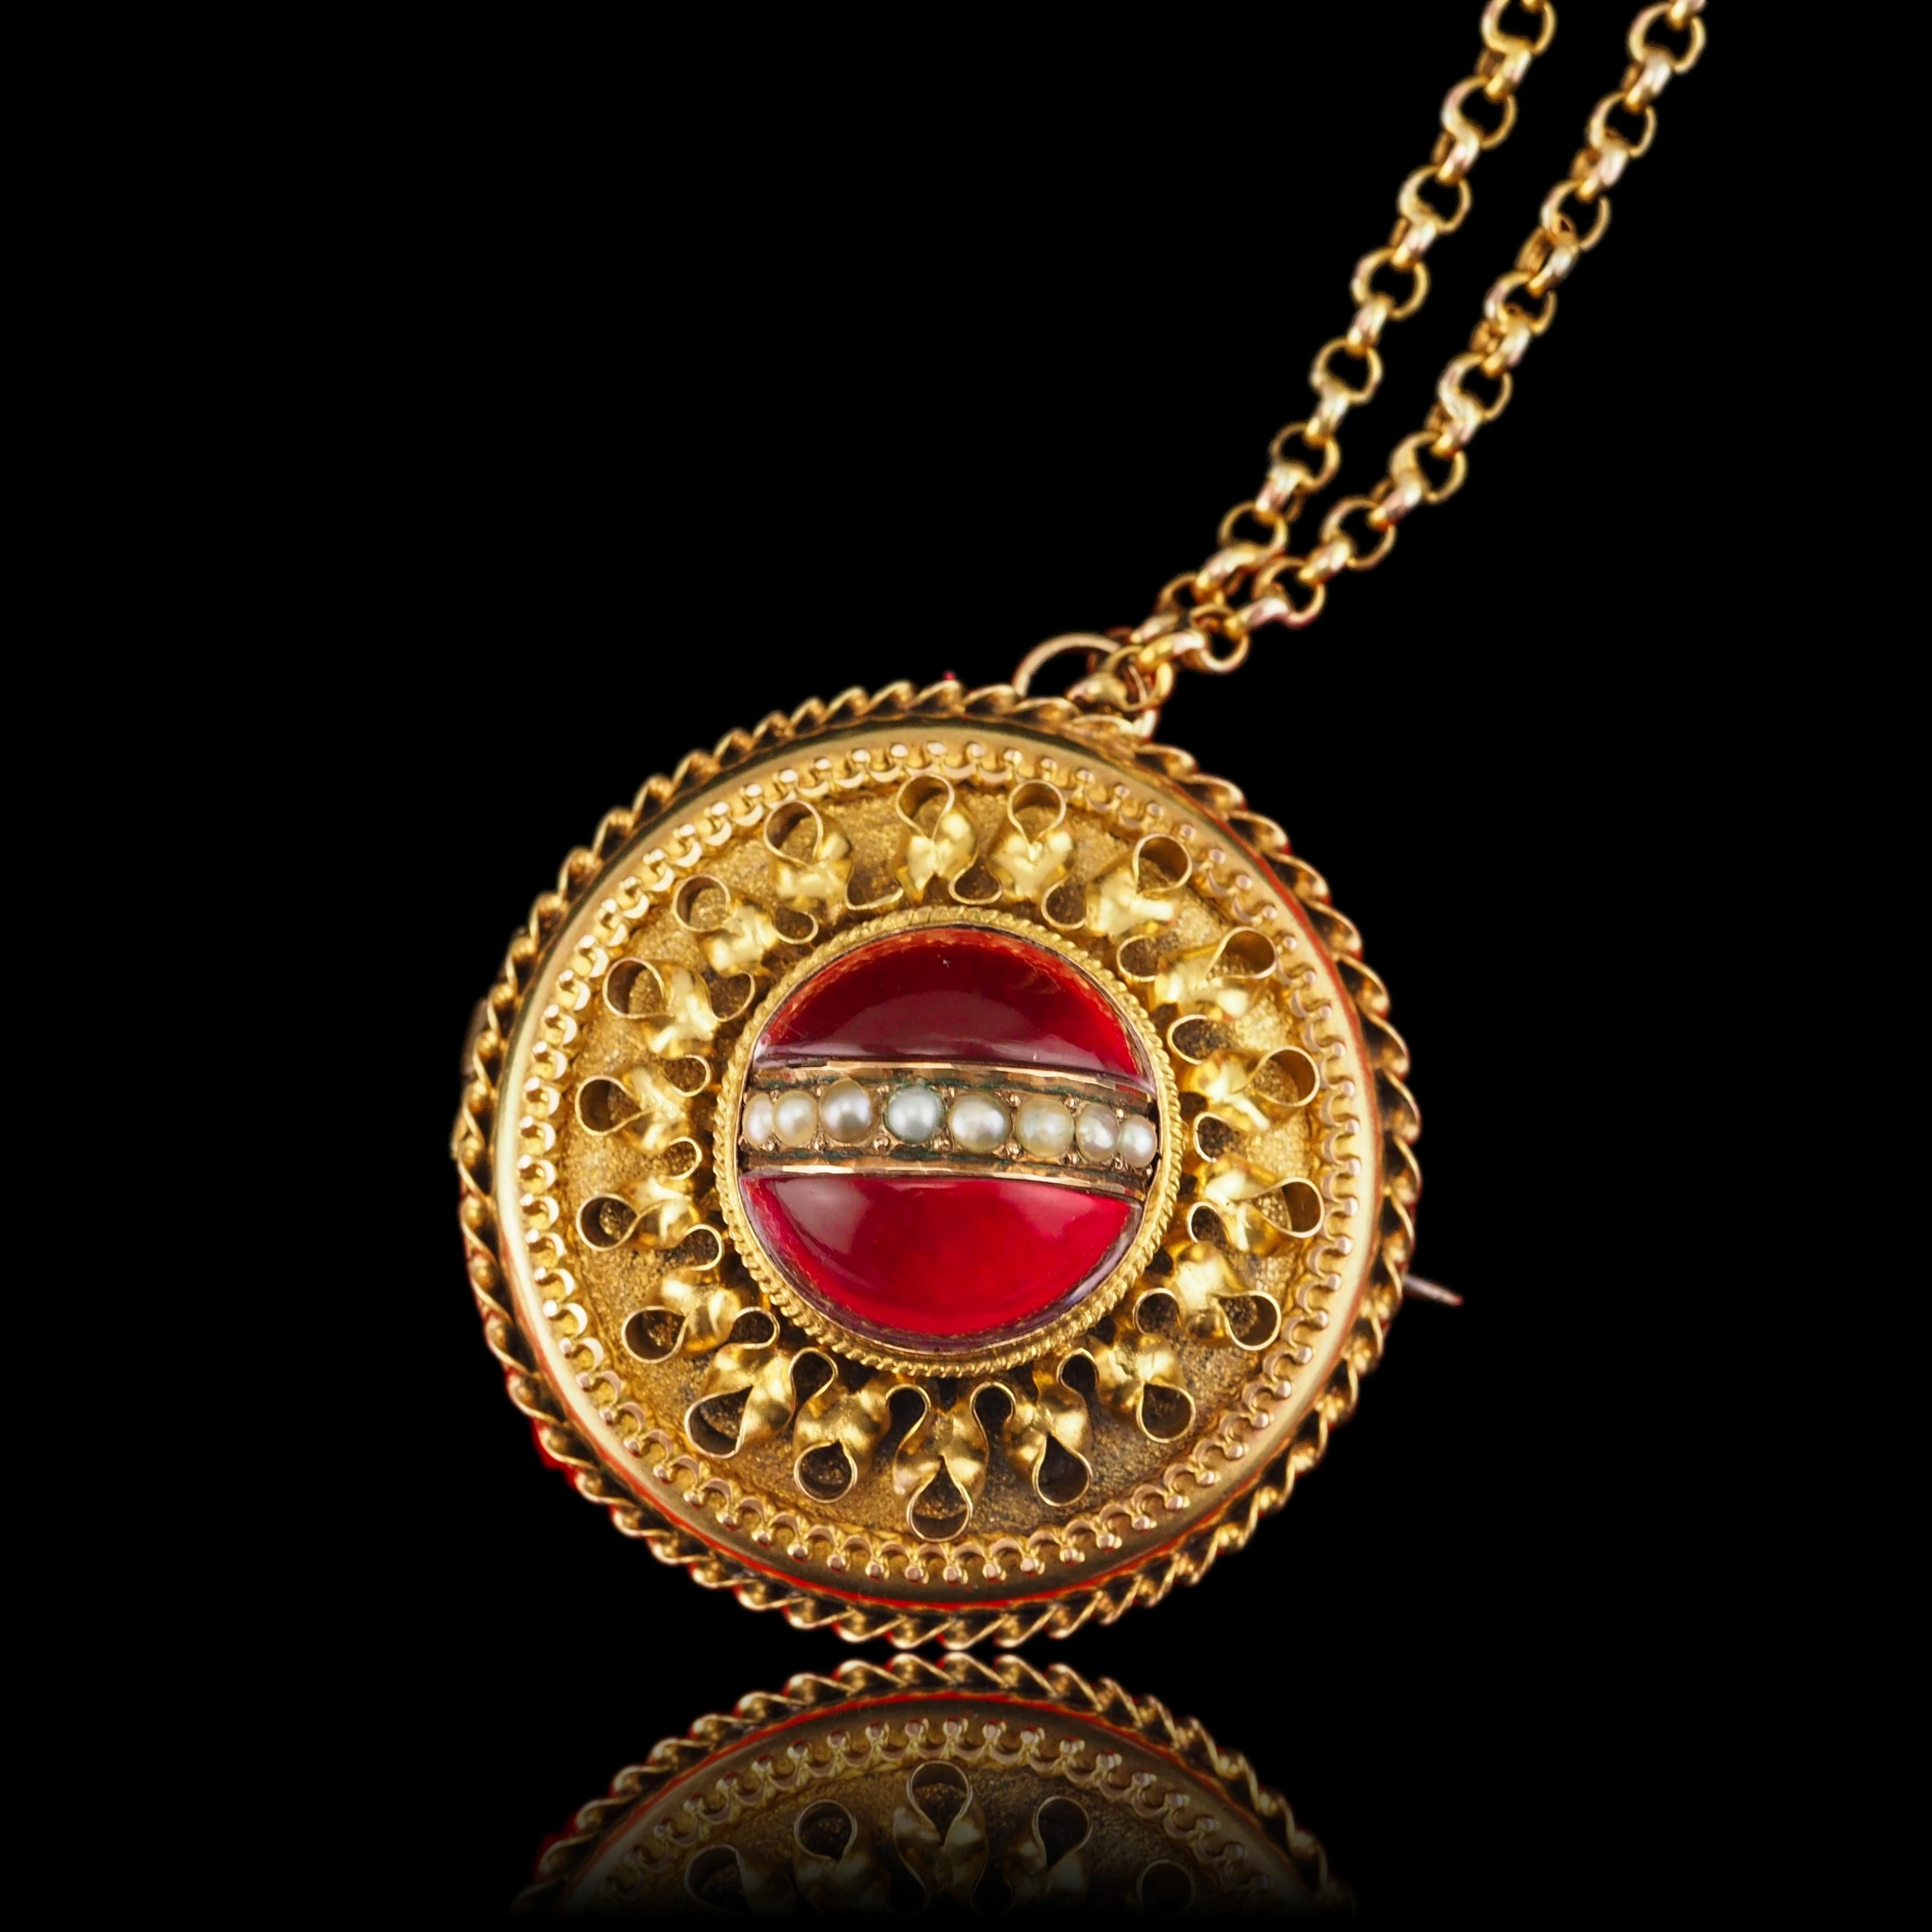 Antique Victorian Etruscan Style Necklace 15K Gold Rock Crystal Pendant c.1870 In Good Condition For Sale In London, GB